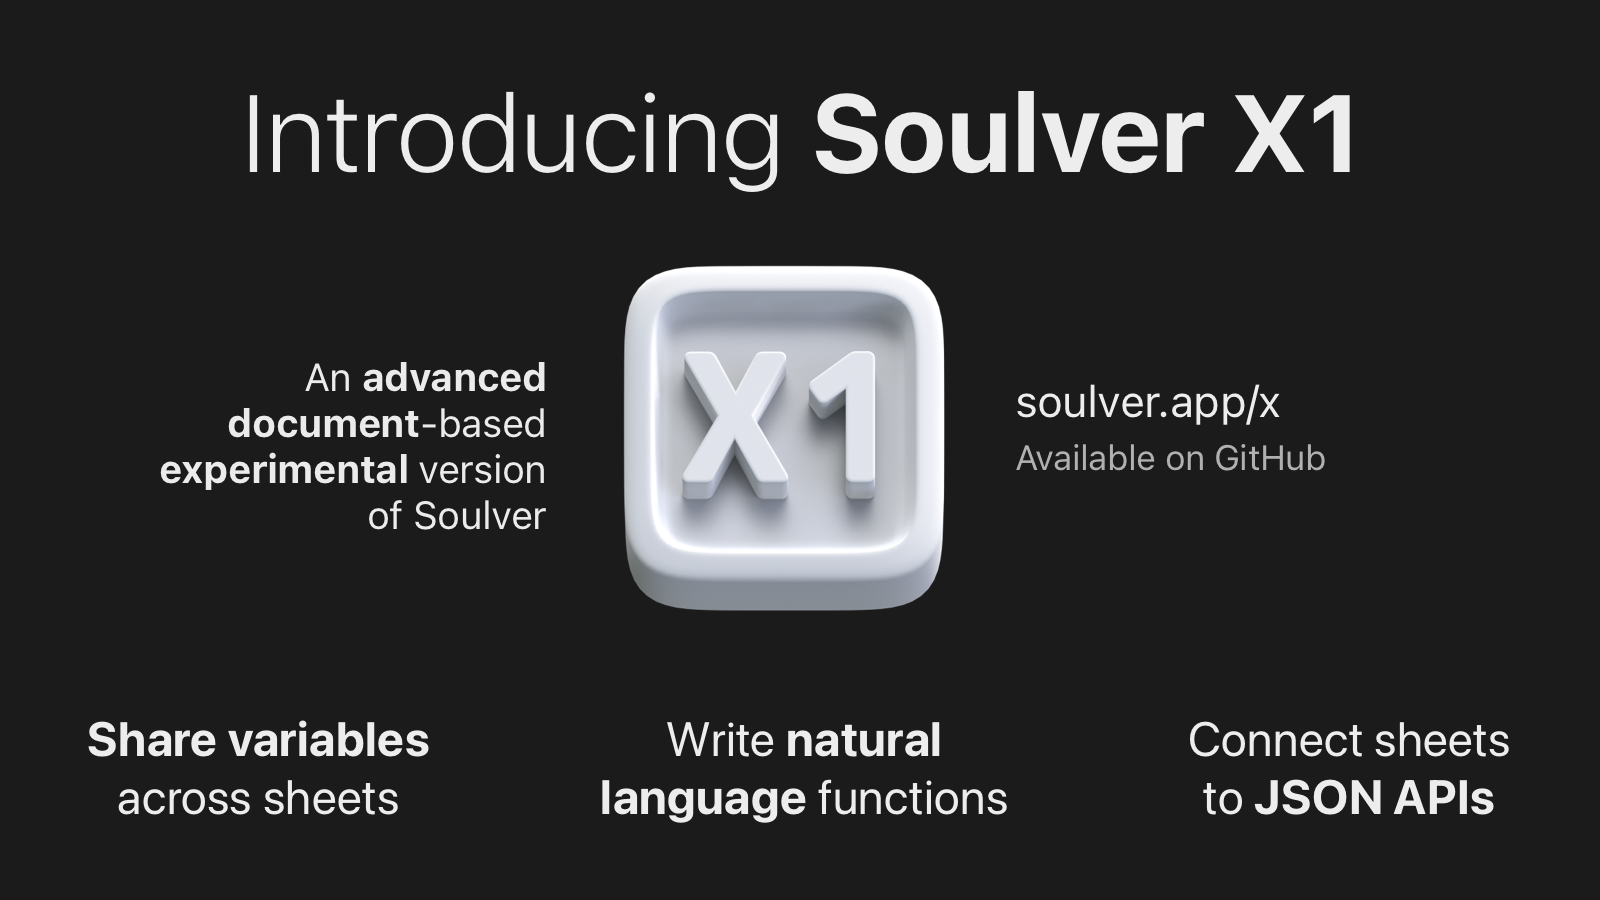 Introducing Soulver X1